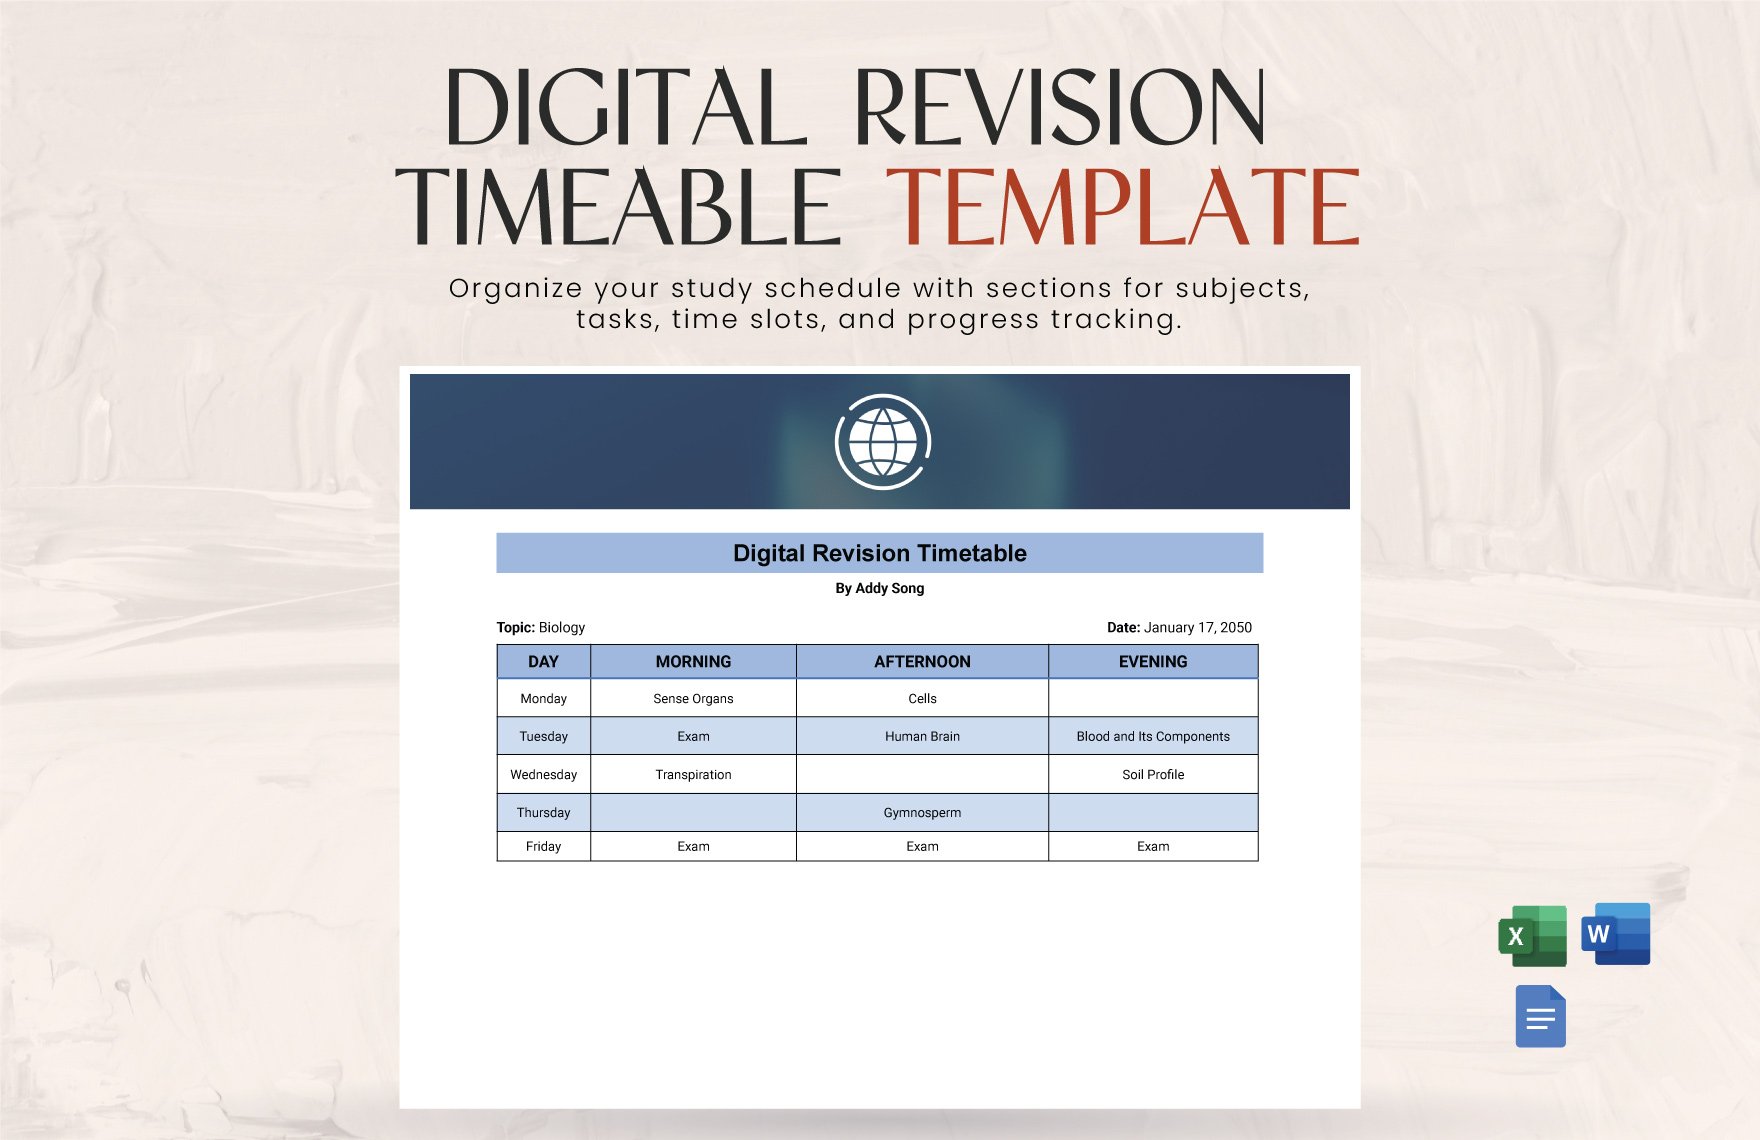 Free Digital Revision Timetable in Word, Google Docs, Excel